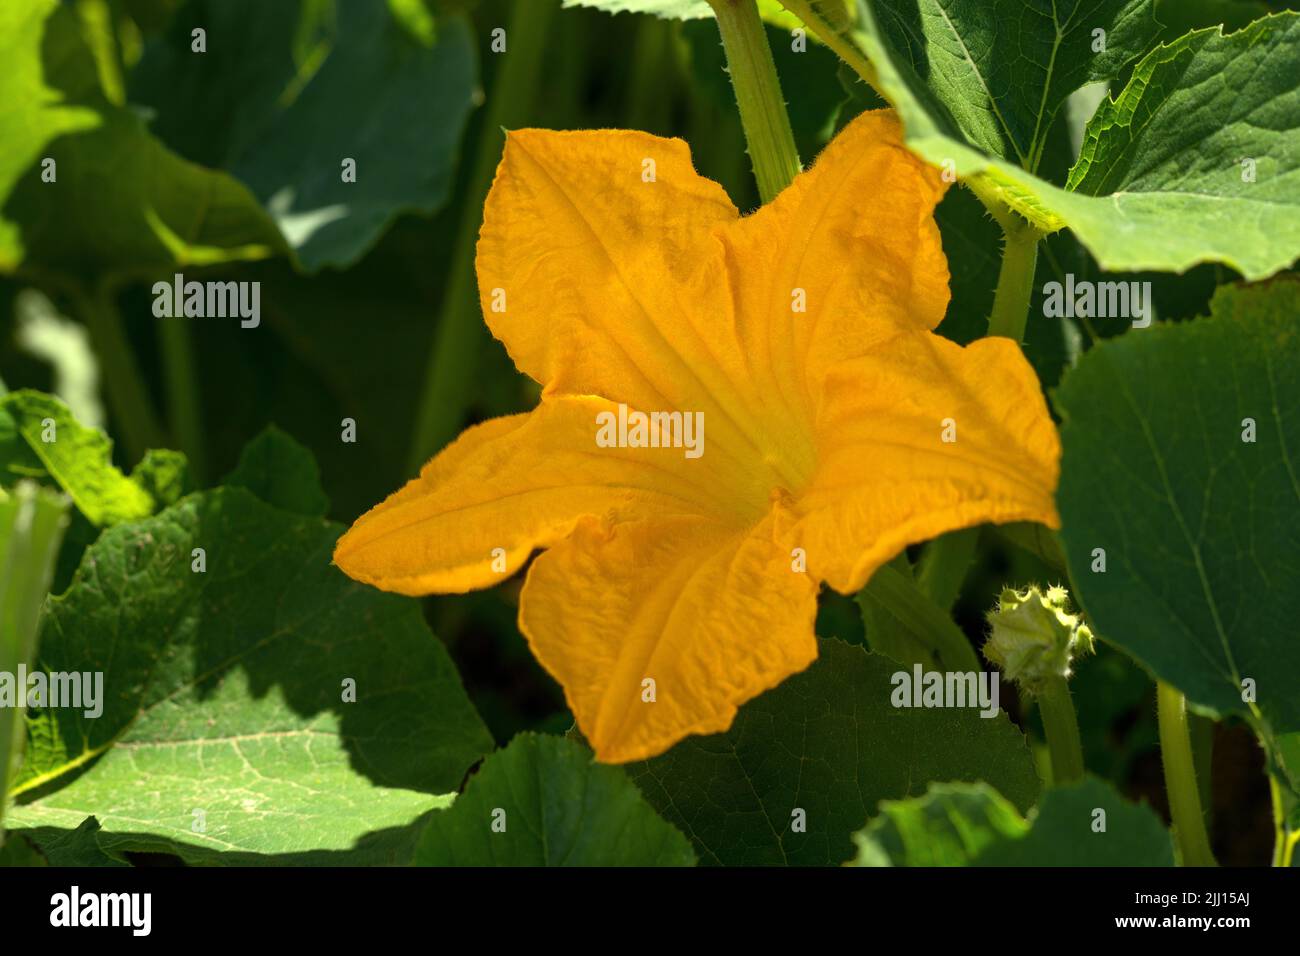 Single large male flower of a zucchini plant Stock Photo